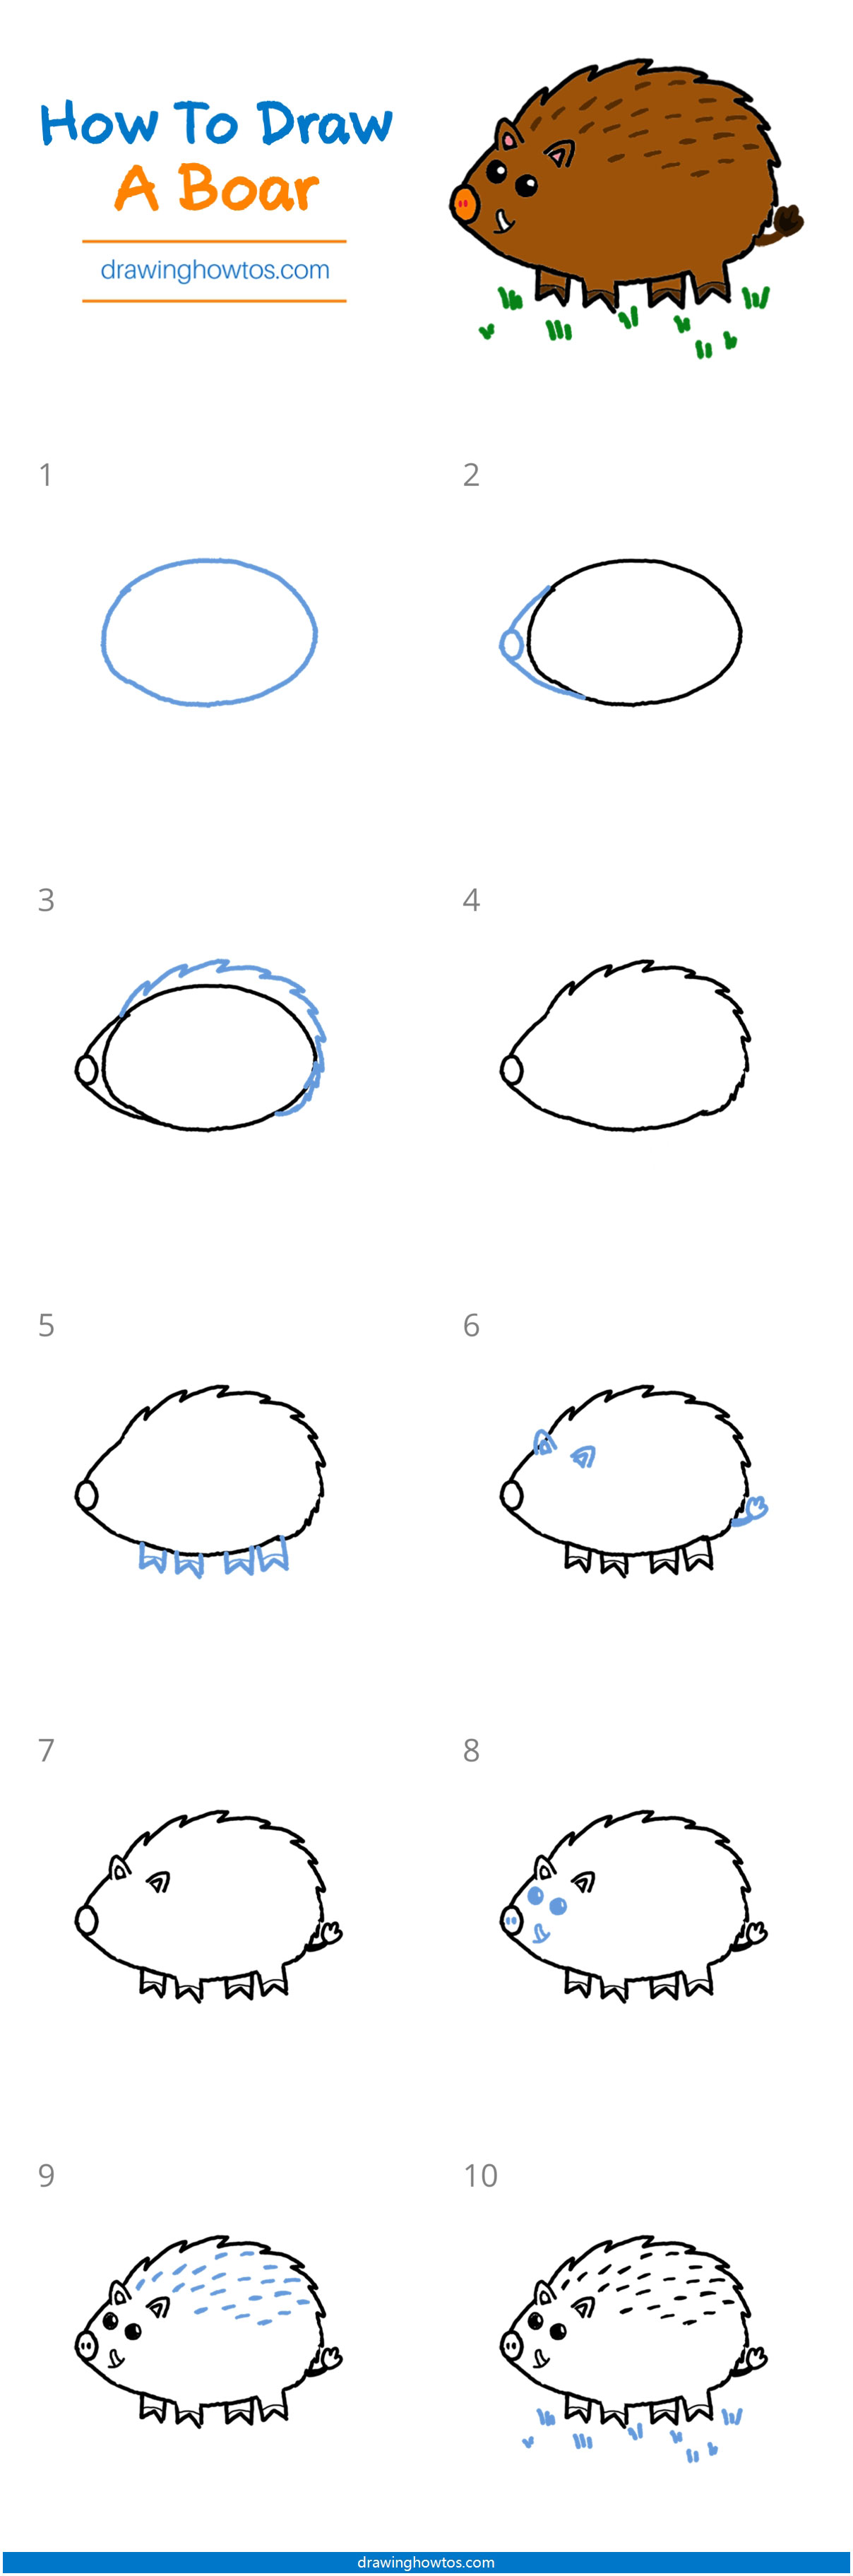 How to Draw a Boar Step by Step